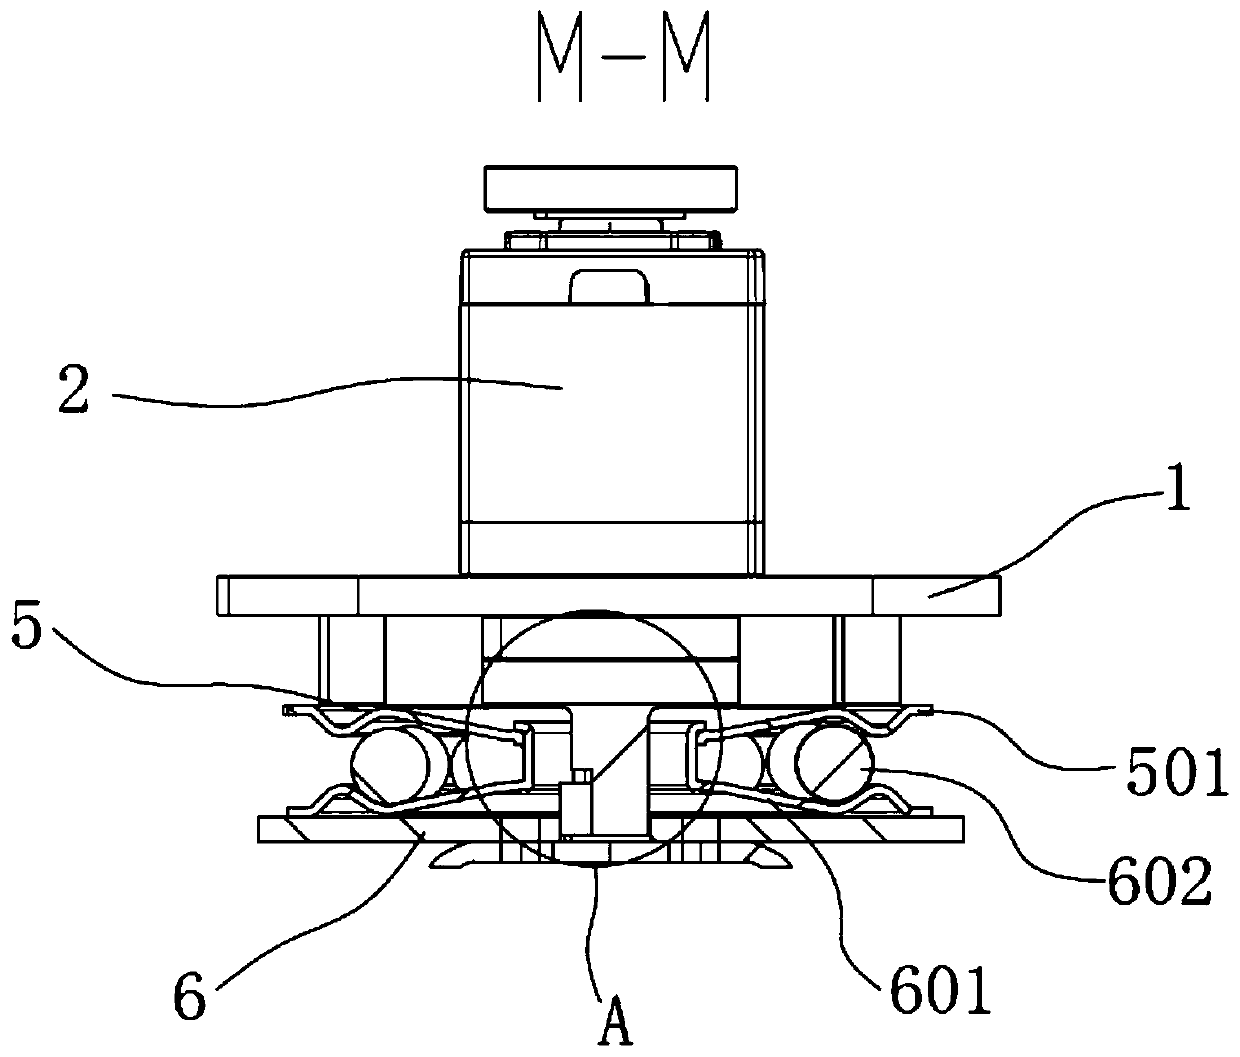 Multi-degree-of-freedom mechanical arm capable of being equipped on small and medium-sized mobile platforms